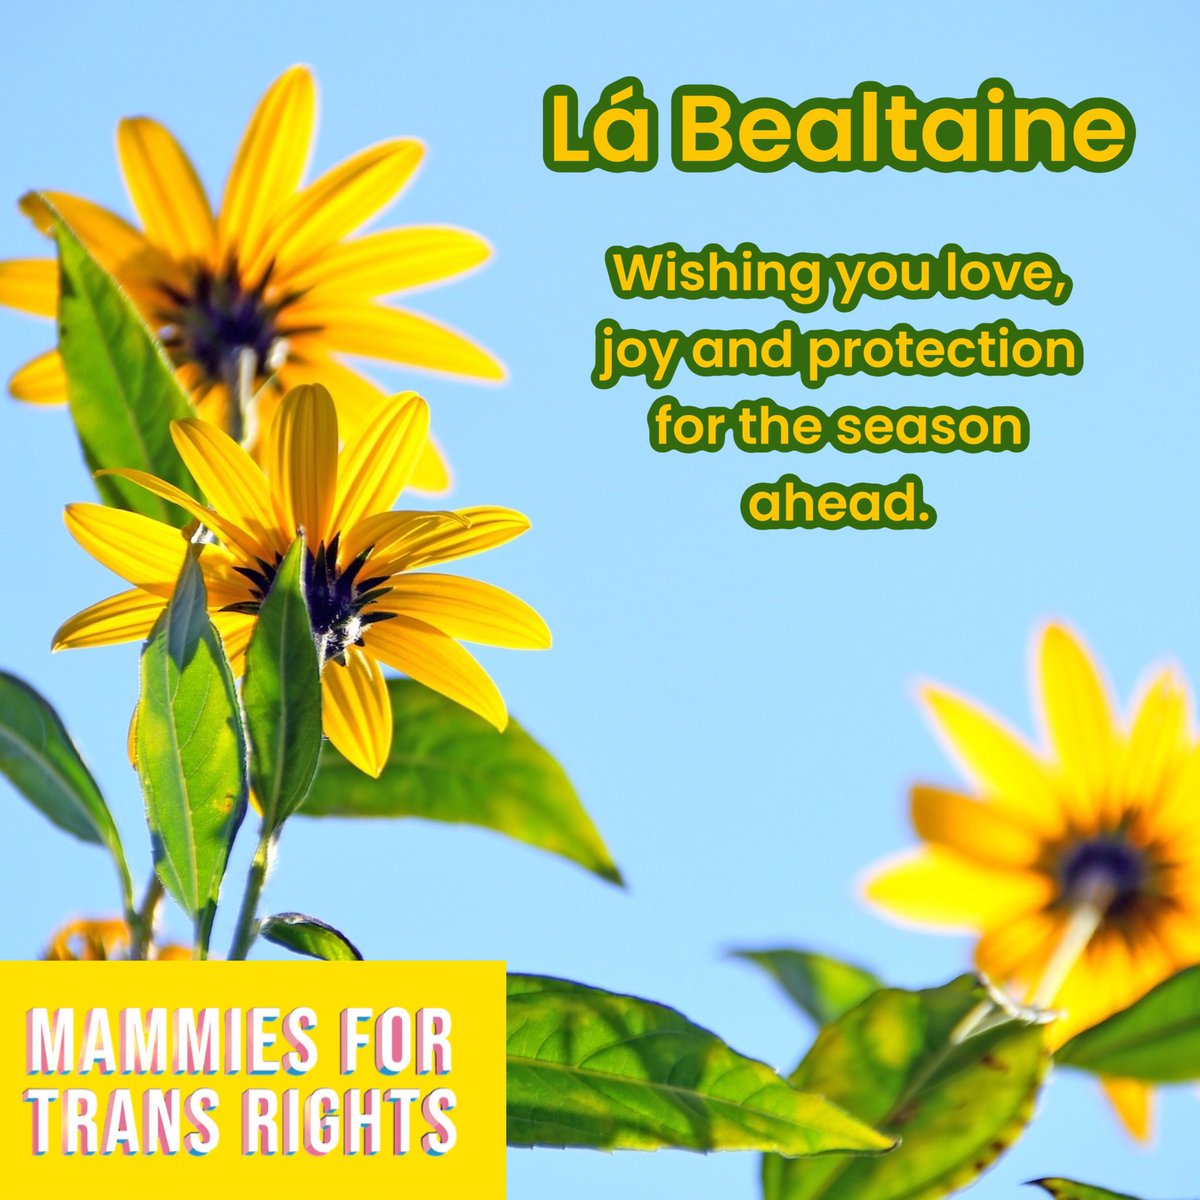 Wishing you love, joy and protection for the season ahead. 

#LáBealtaine #Beltane #LoveWins #TransJoy